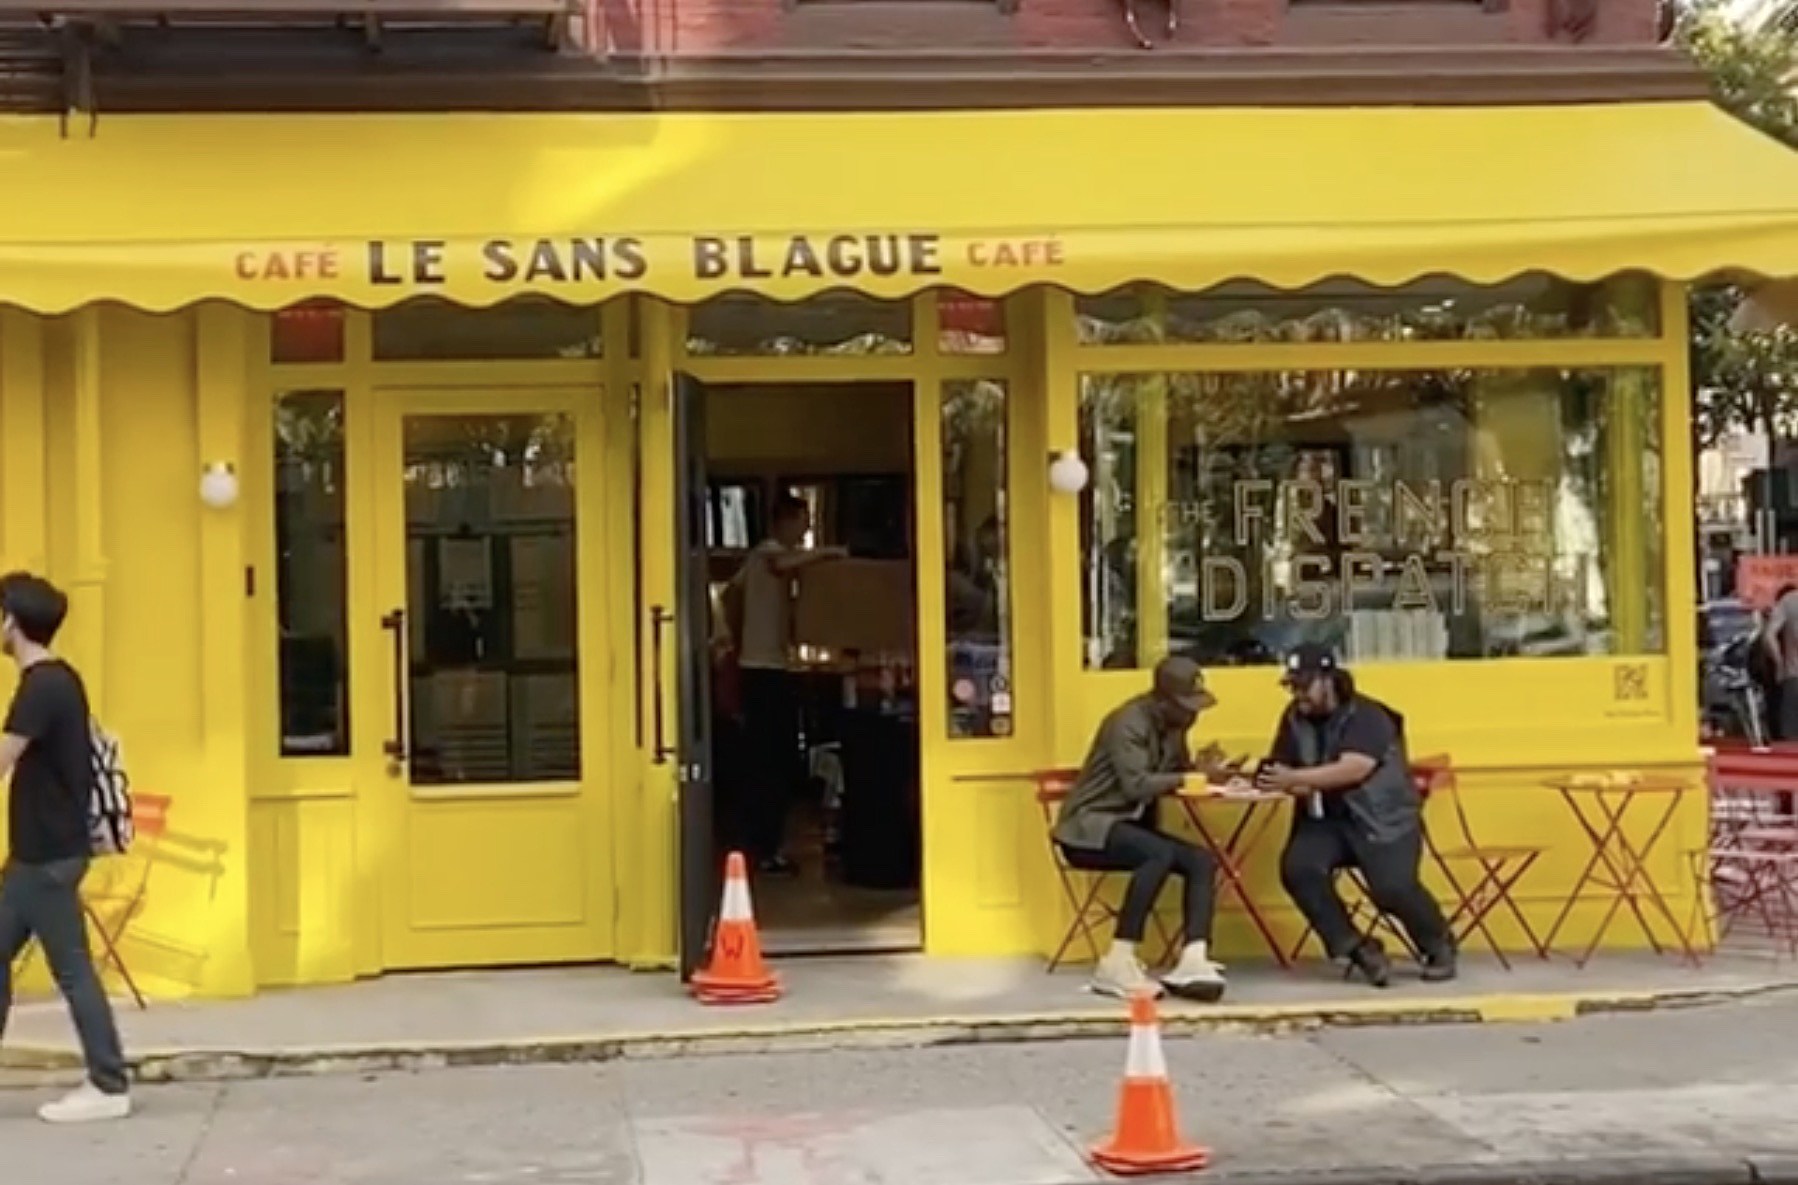 Visit the Wes Anderson 'French Dispatch' pop-up café in NYC this weekend